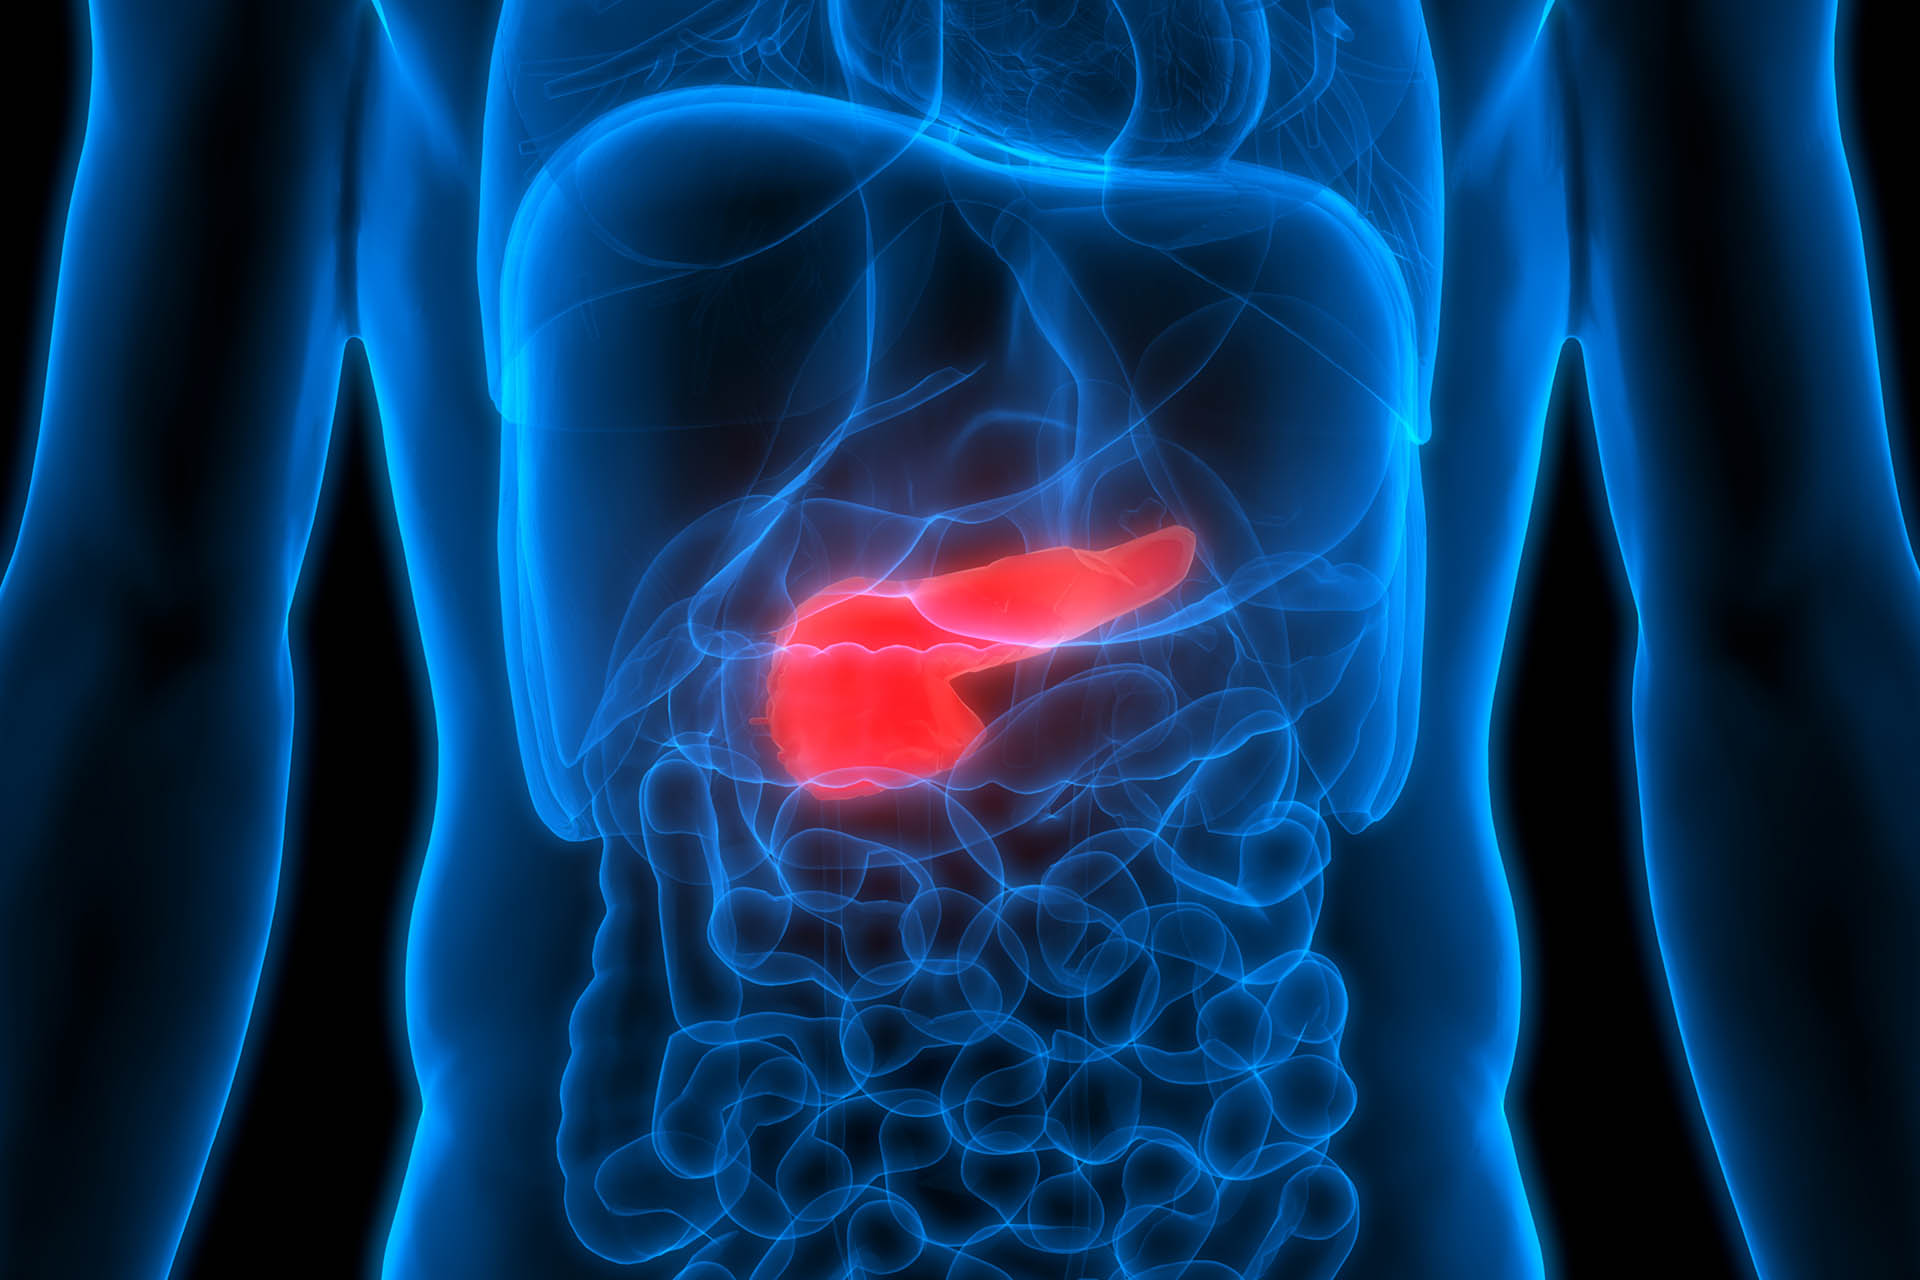 Illustrated xray image of body with highlighted pancreas